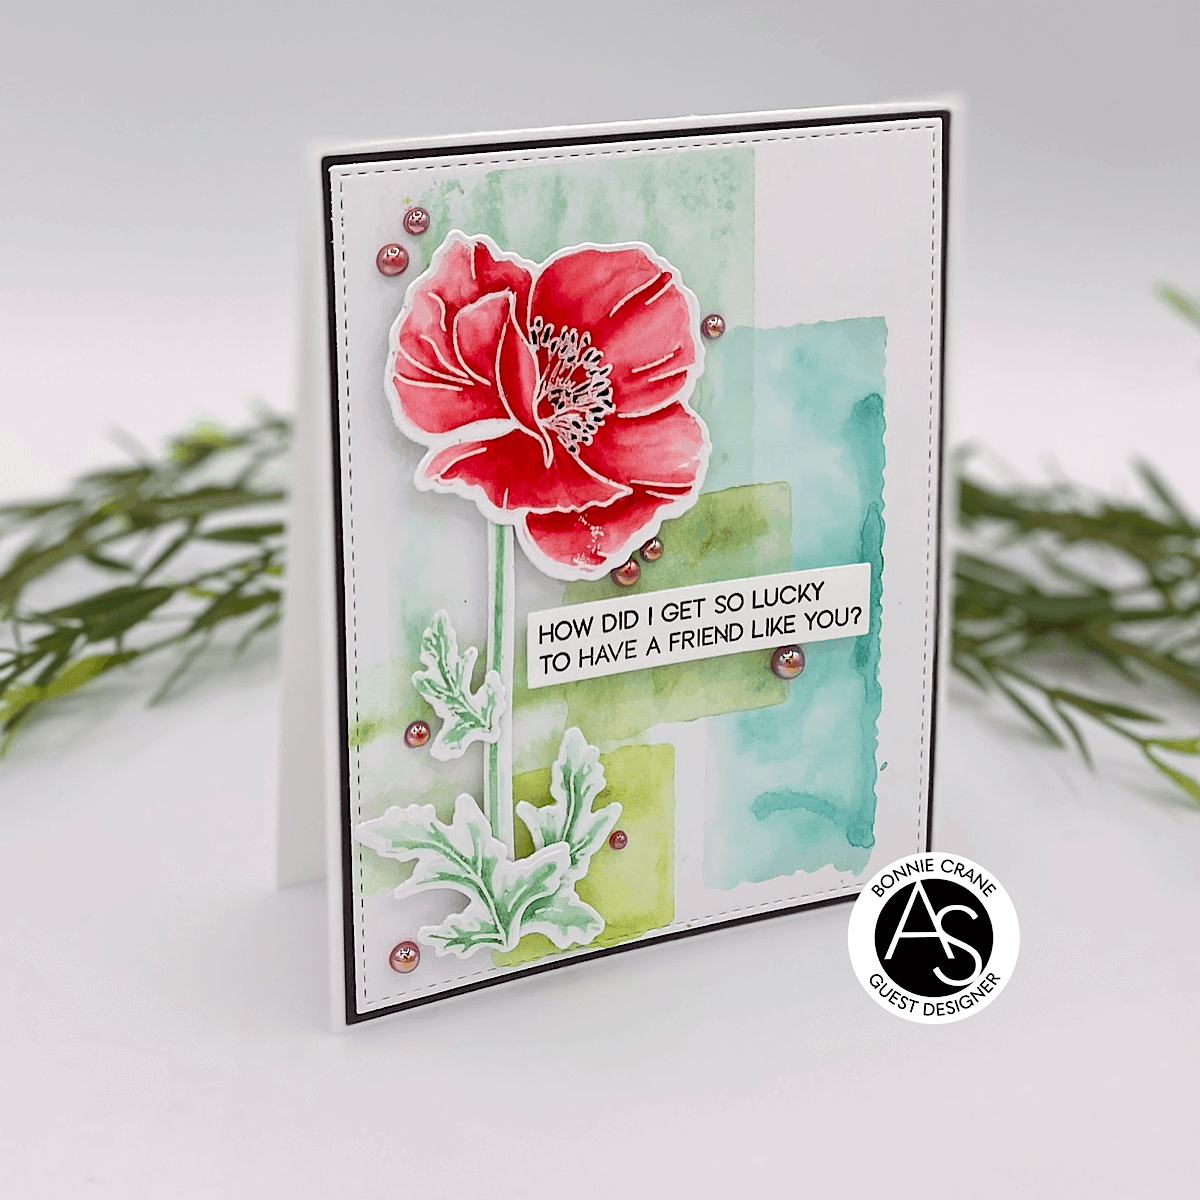 Cindy-Poppies-Stamp-alex-syberia-designs-flowers-cardmaking-coloring-dies-stencils-cascards-tips-video-blog-handmadecards